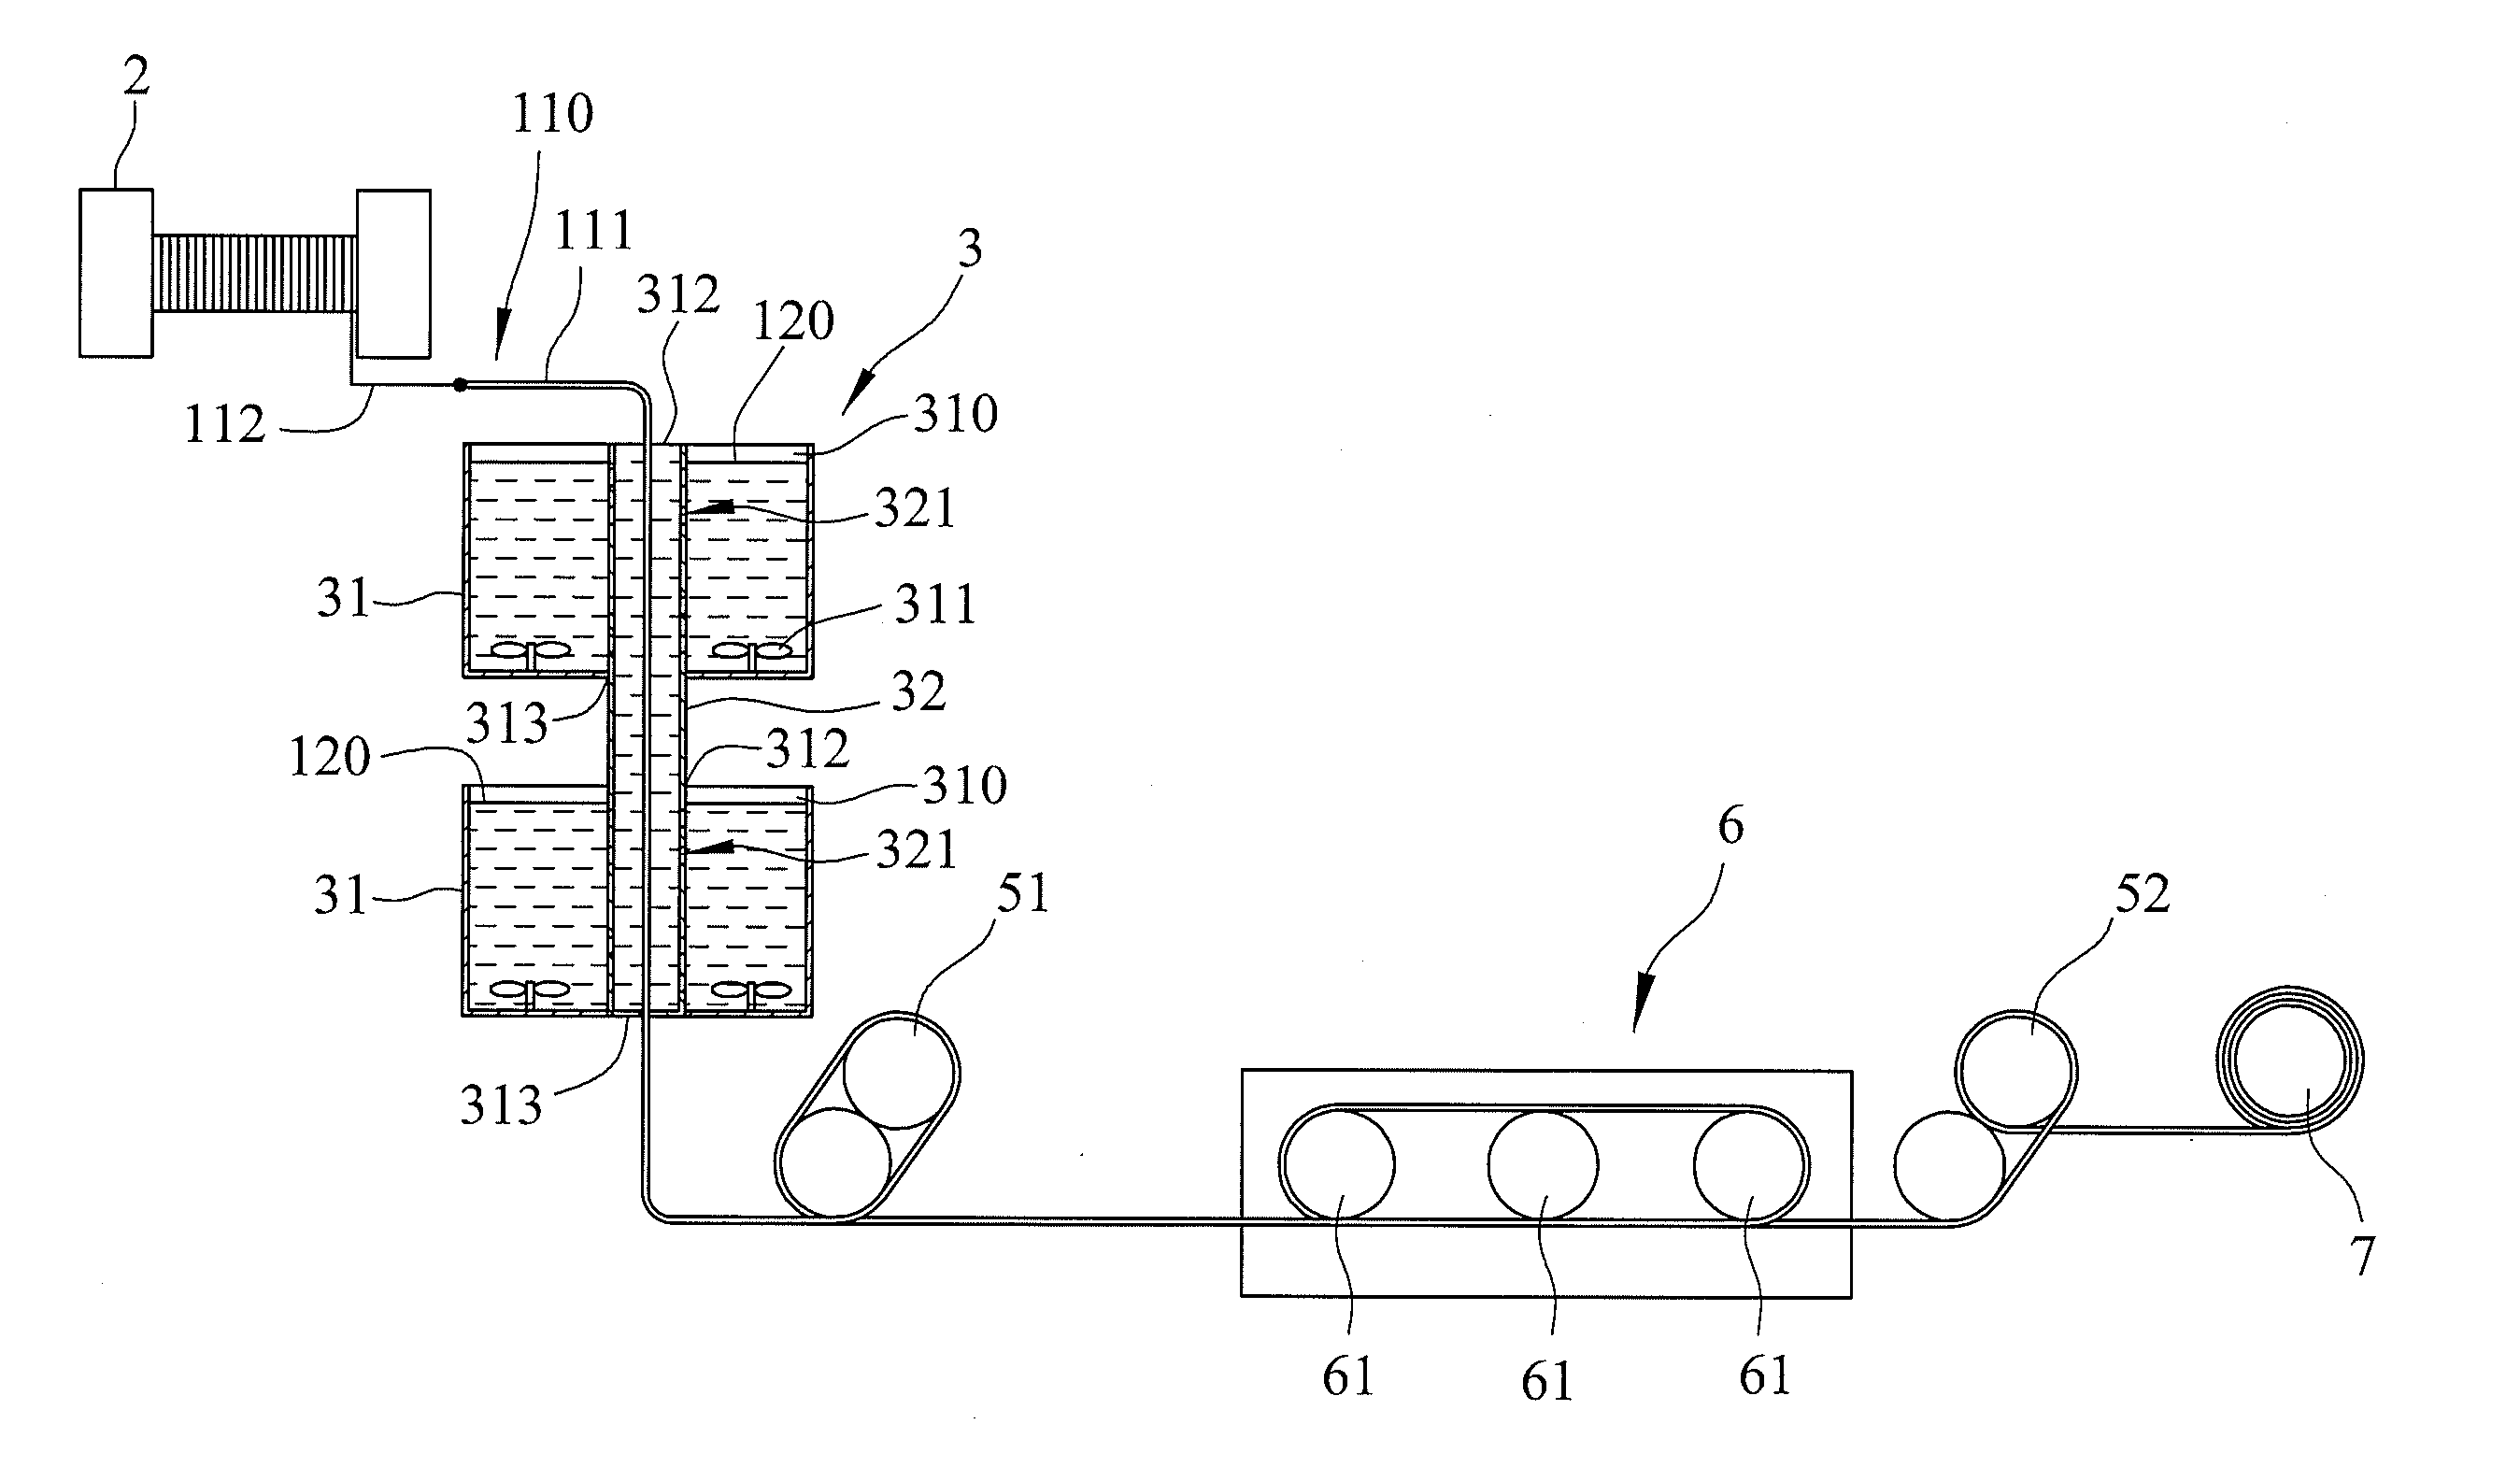 System for fabricating a conductive yarn from a preformed yarn